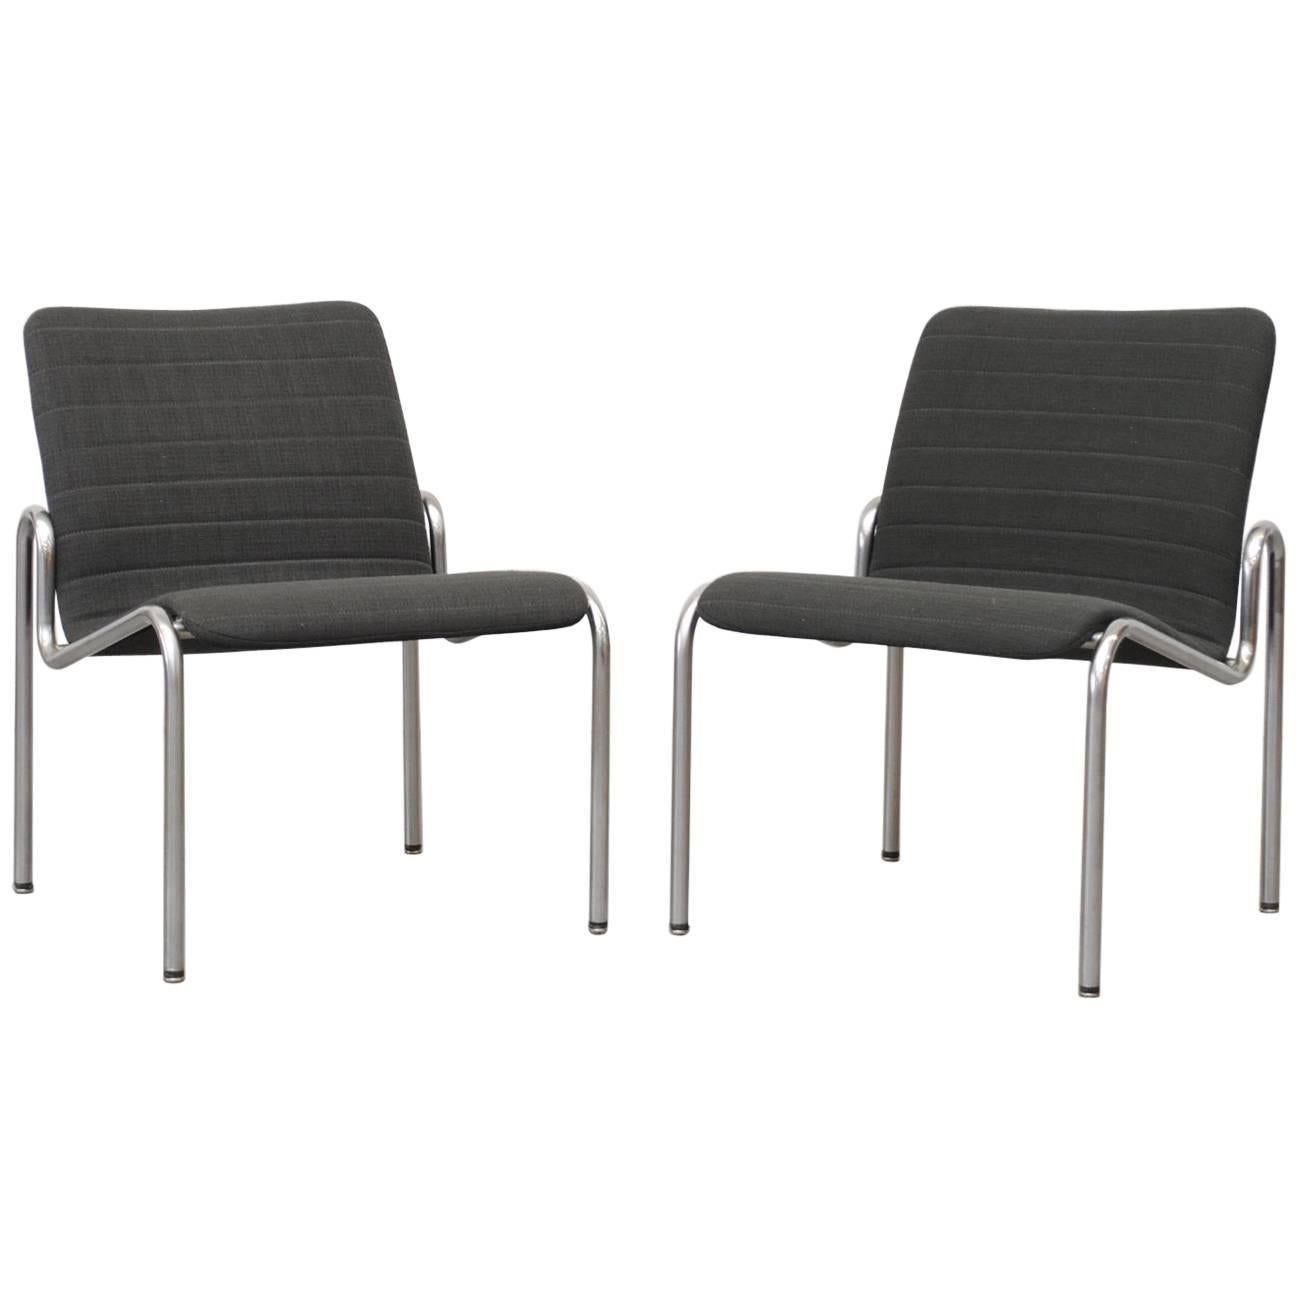 Pair of Kho Liang Ie 703 Lounge Chairs